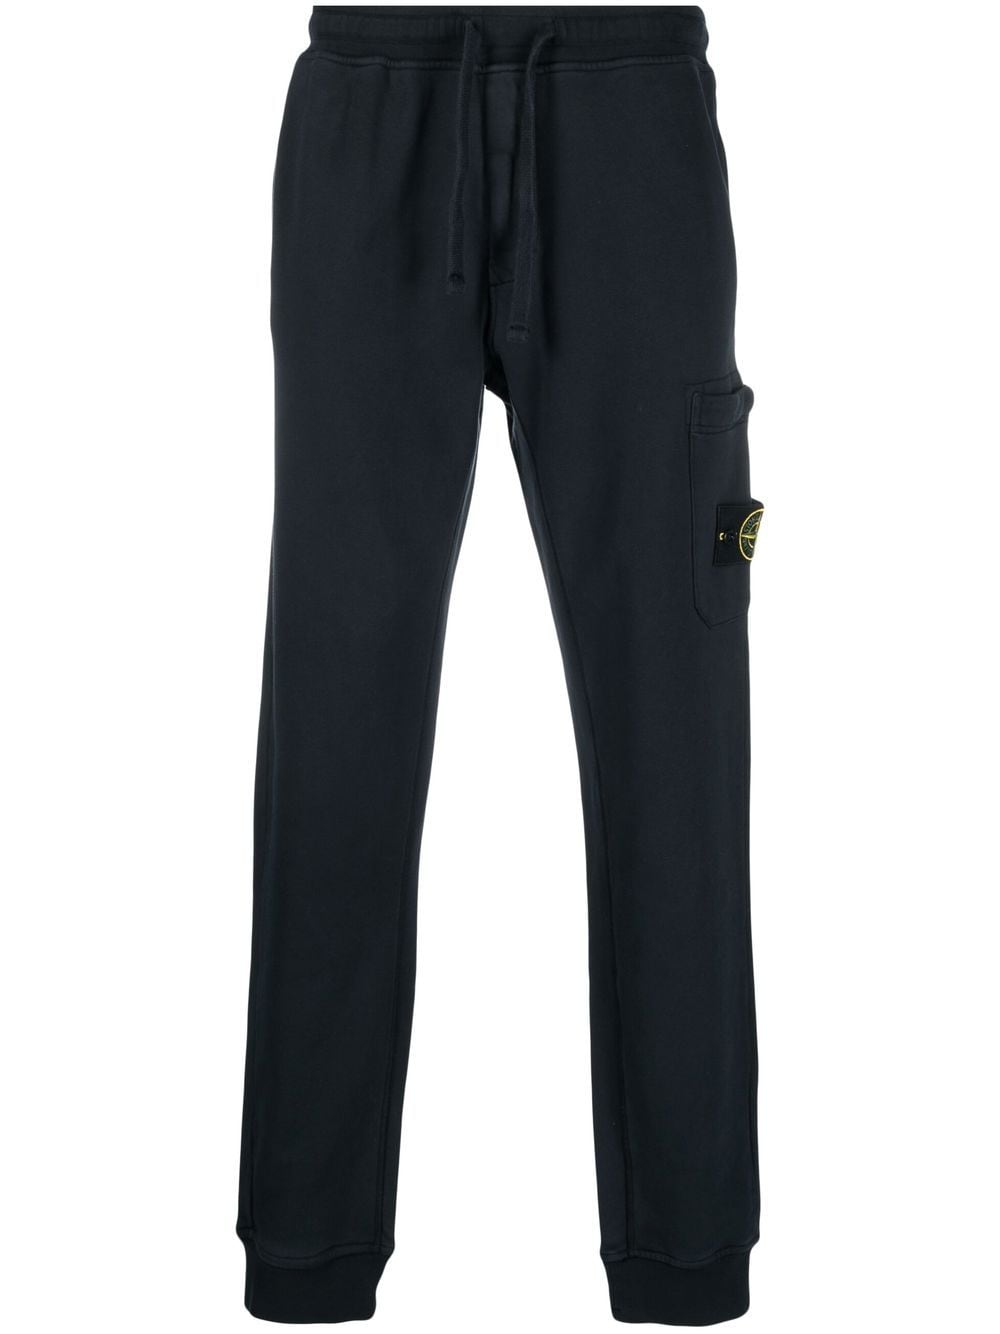 STONE ISLAND COMPASS-PATCH TRACK PANTS